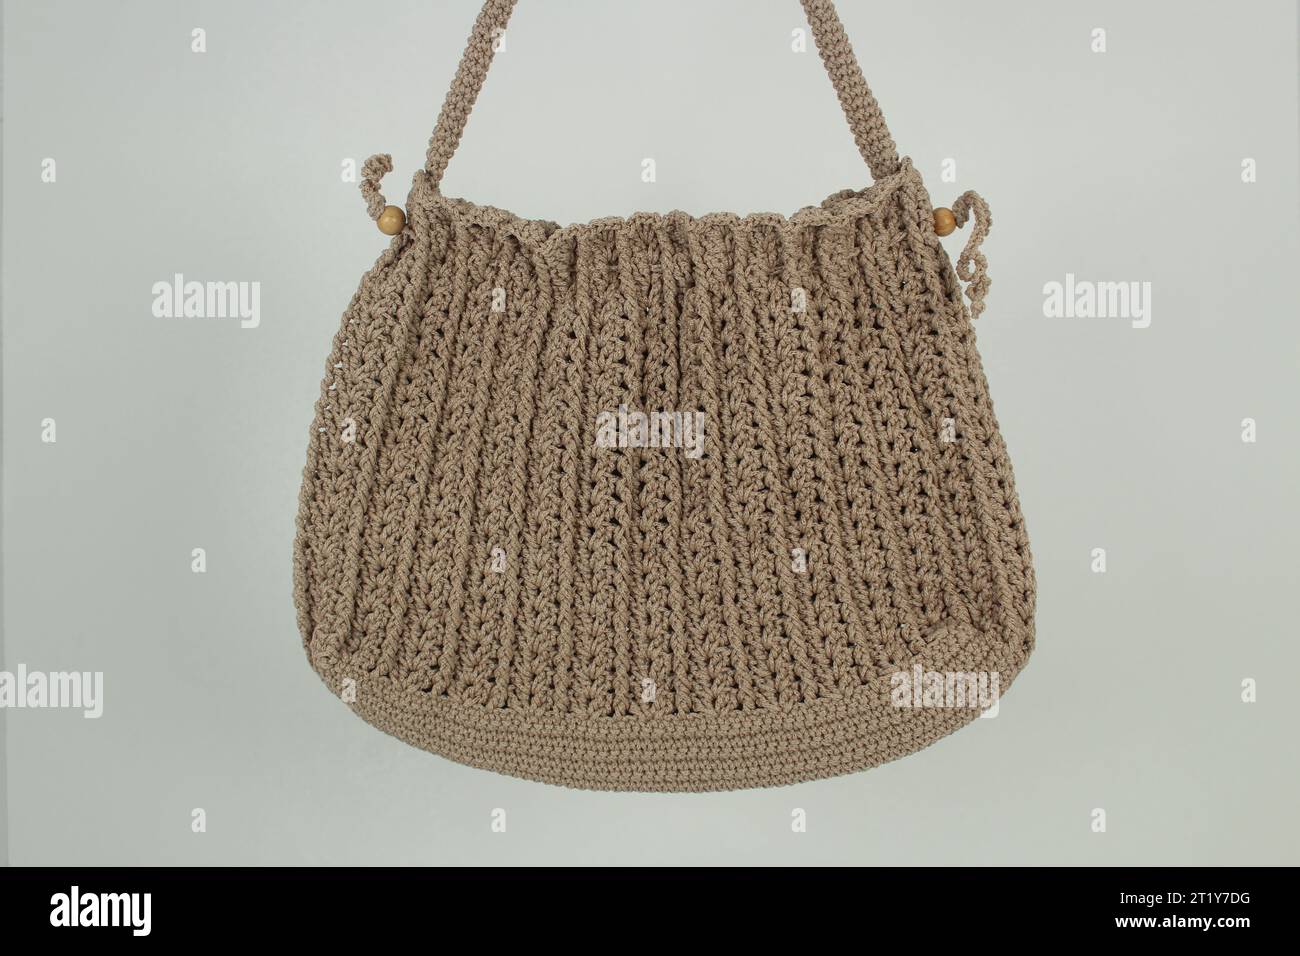 Knitted handmade milky brown bag isolated on white background. Stock Photo